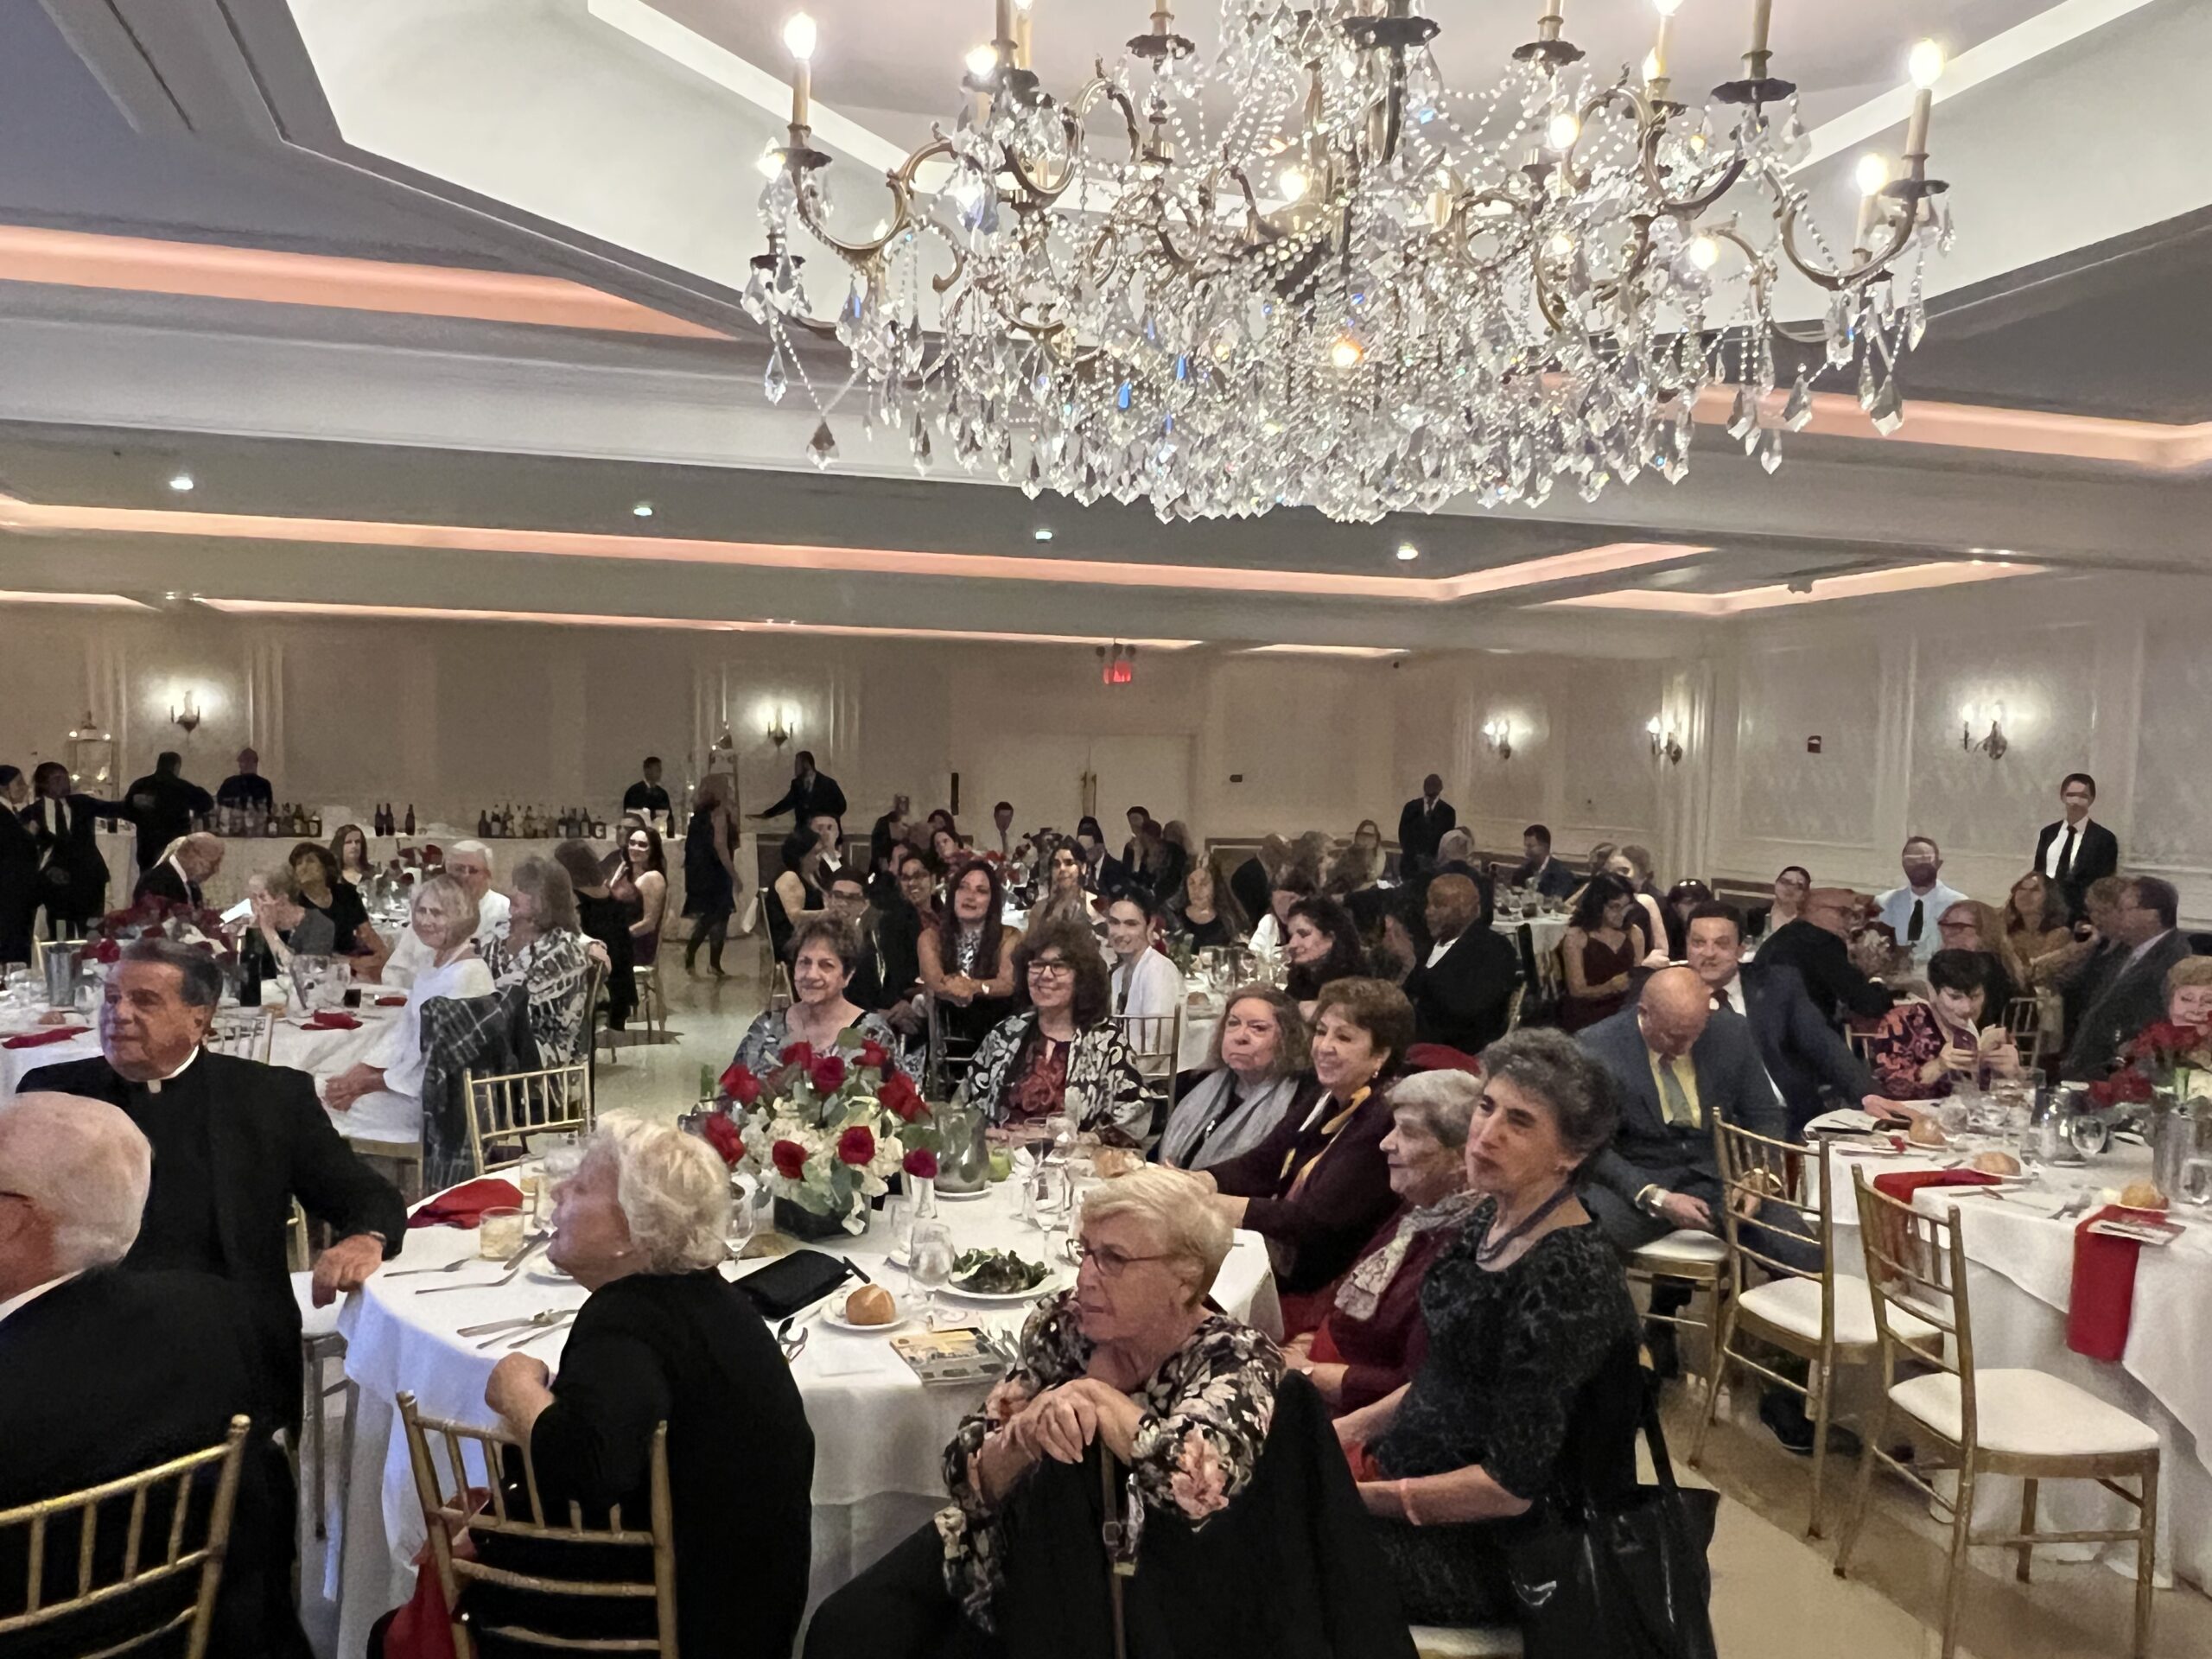 The 120th NCHHC anniversary gala was held at the El Caribe Country Club.